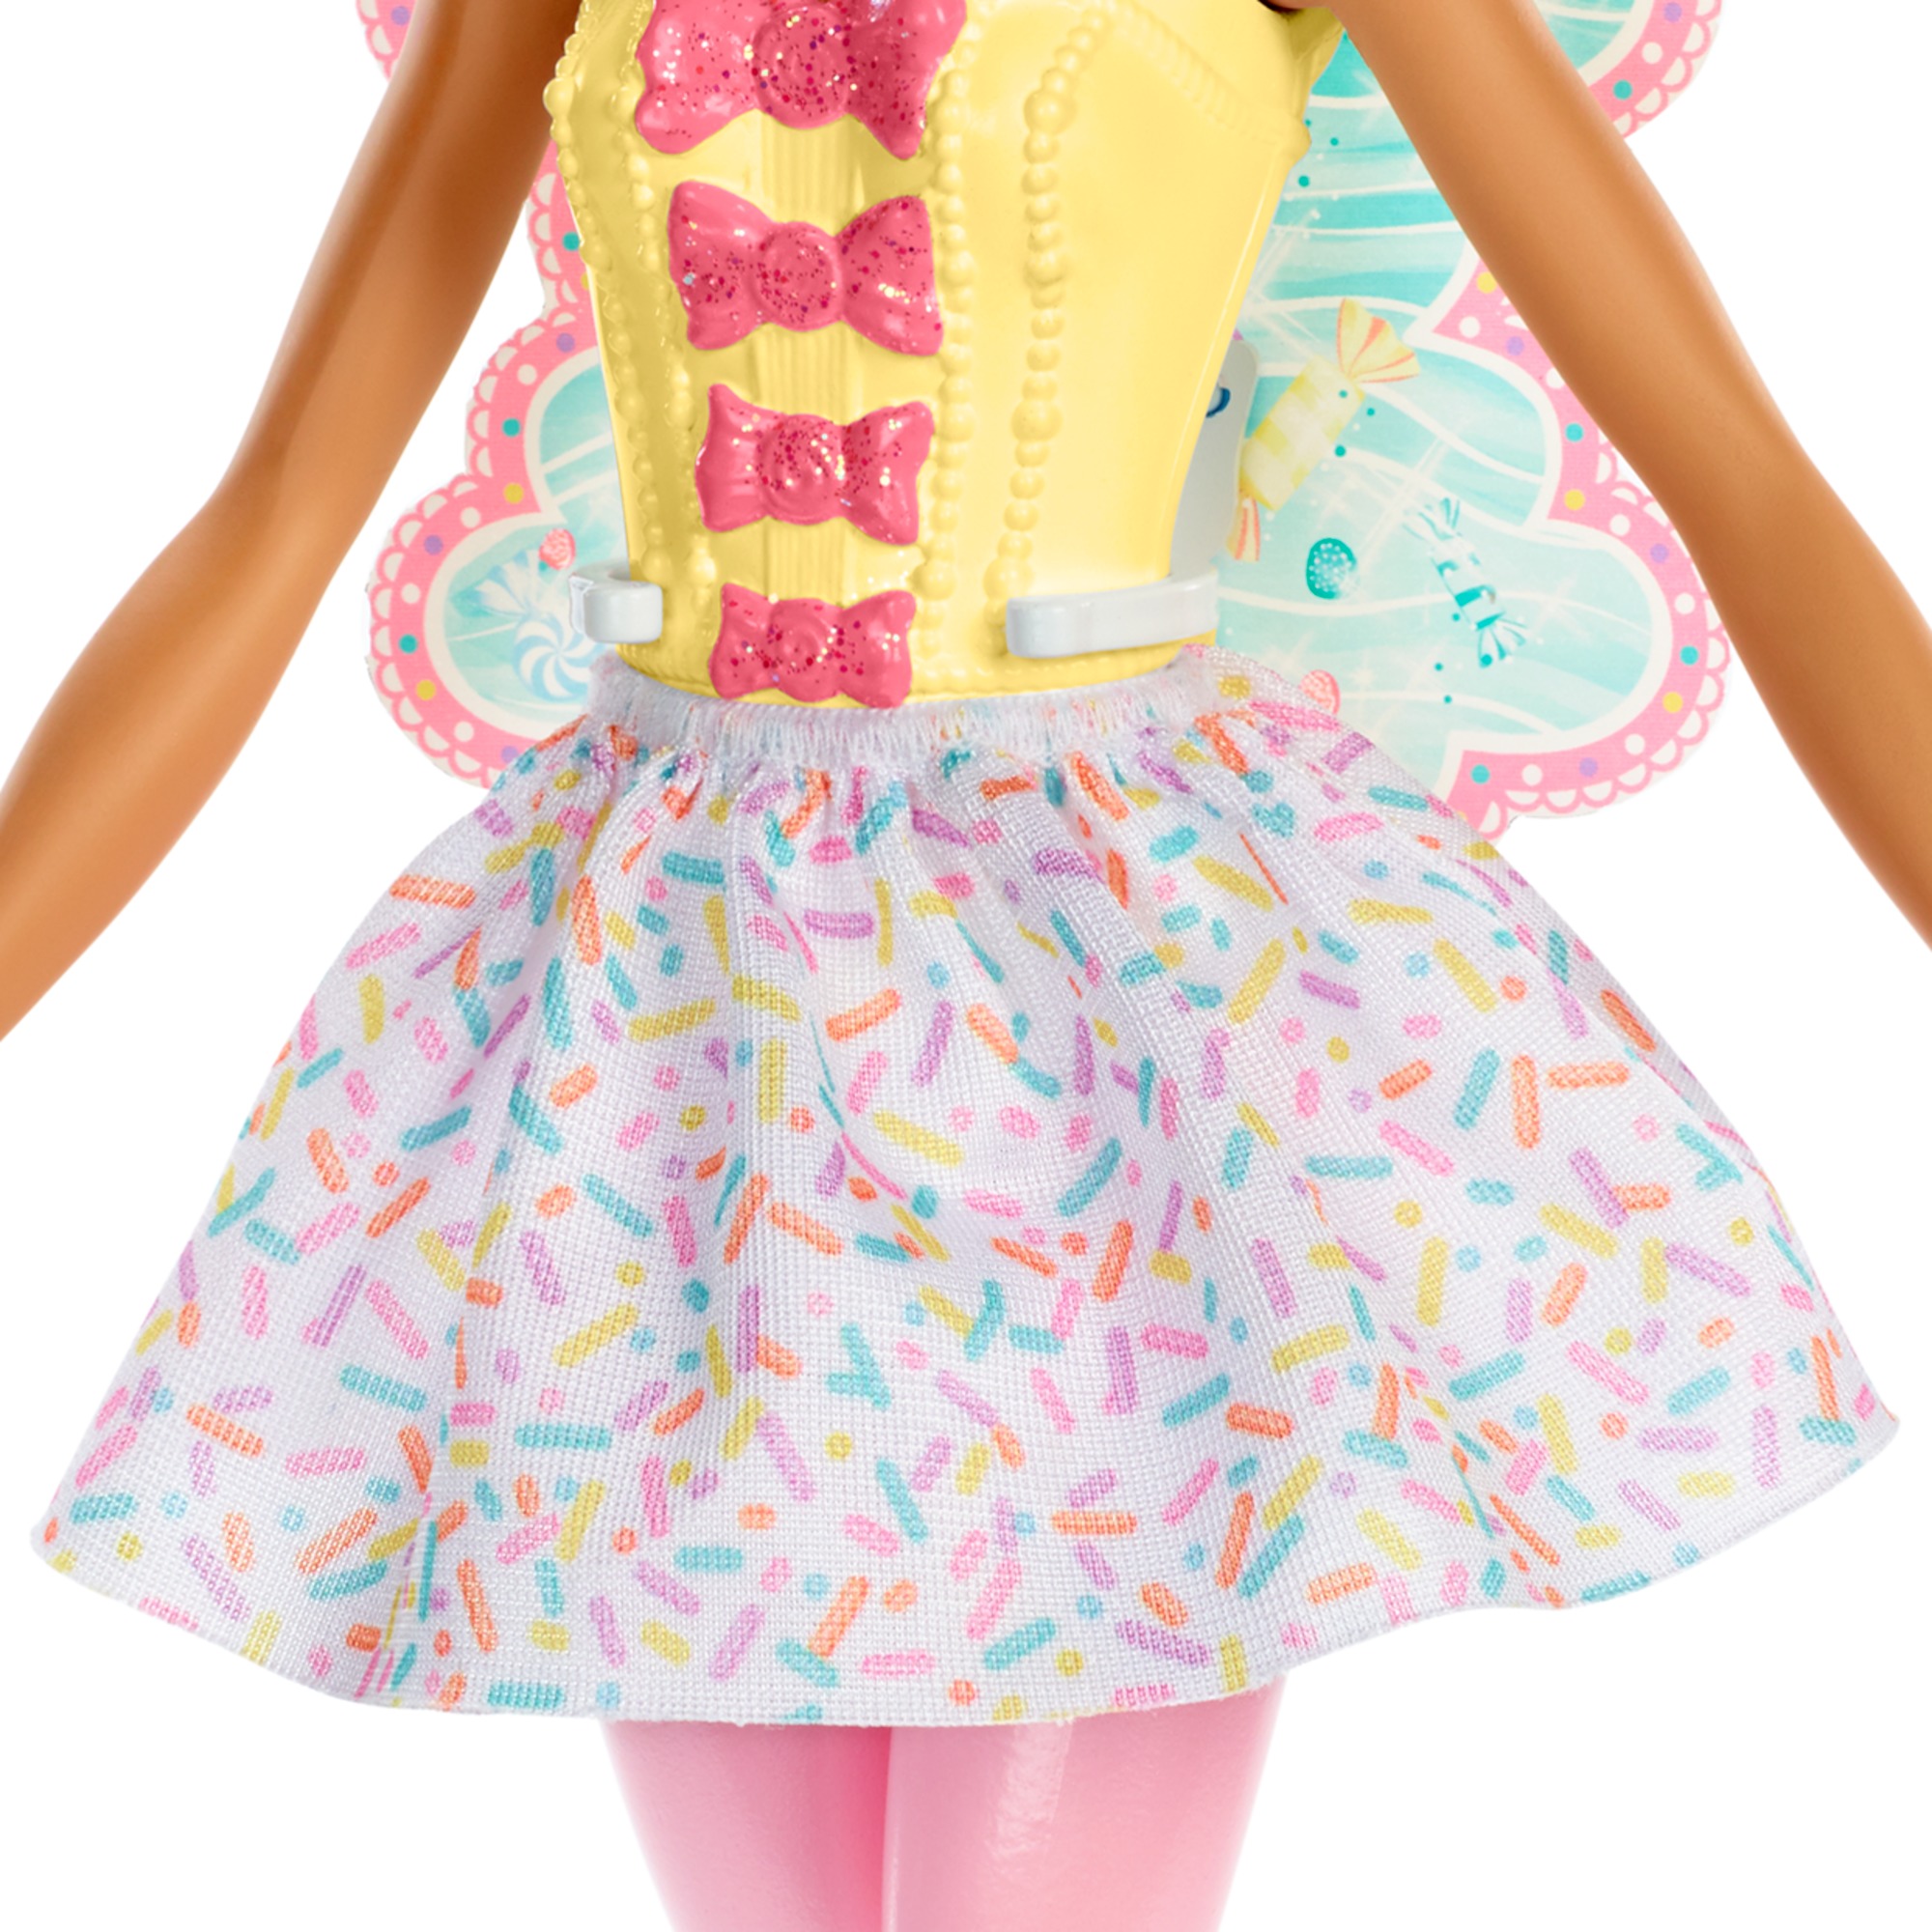 Barbie Dreamtopia Fairy Doll, Pink Hair & Candy-Decorated Wings - image 5 of 8